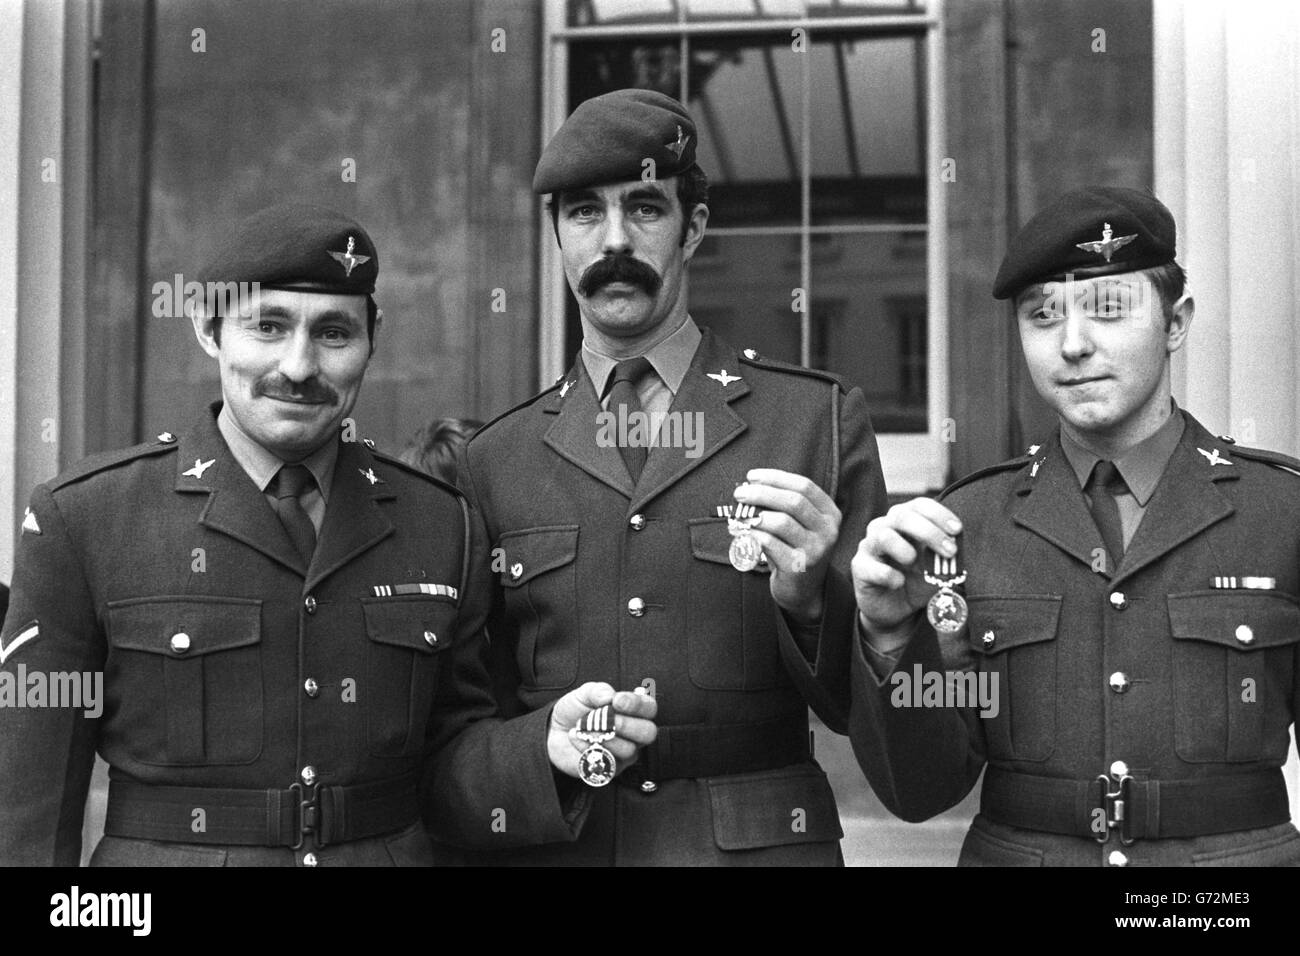 Members of the Parachute Regiment at Buckingham Palace after collecting Military Medals from the Queen for gallantry in the Falklands War. (l-r) L/Cpl Martin Bentley, of Manchester, Sgt Terence Barrett, of Chelmsford, and Private Barry Grayling, of Felixstowe. Stock Photo